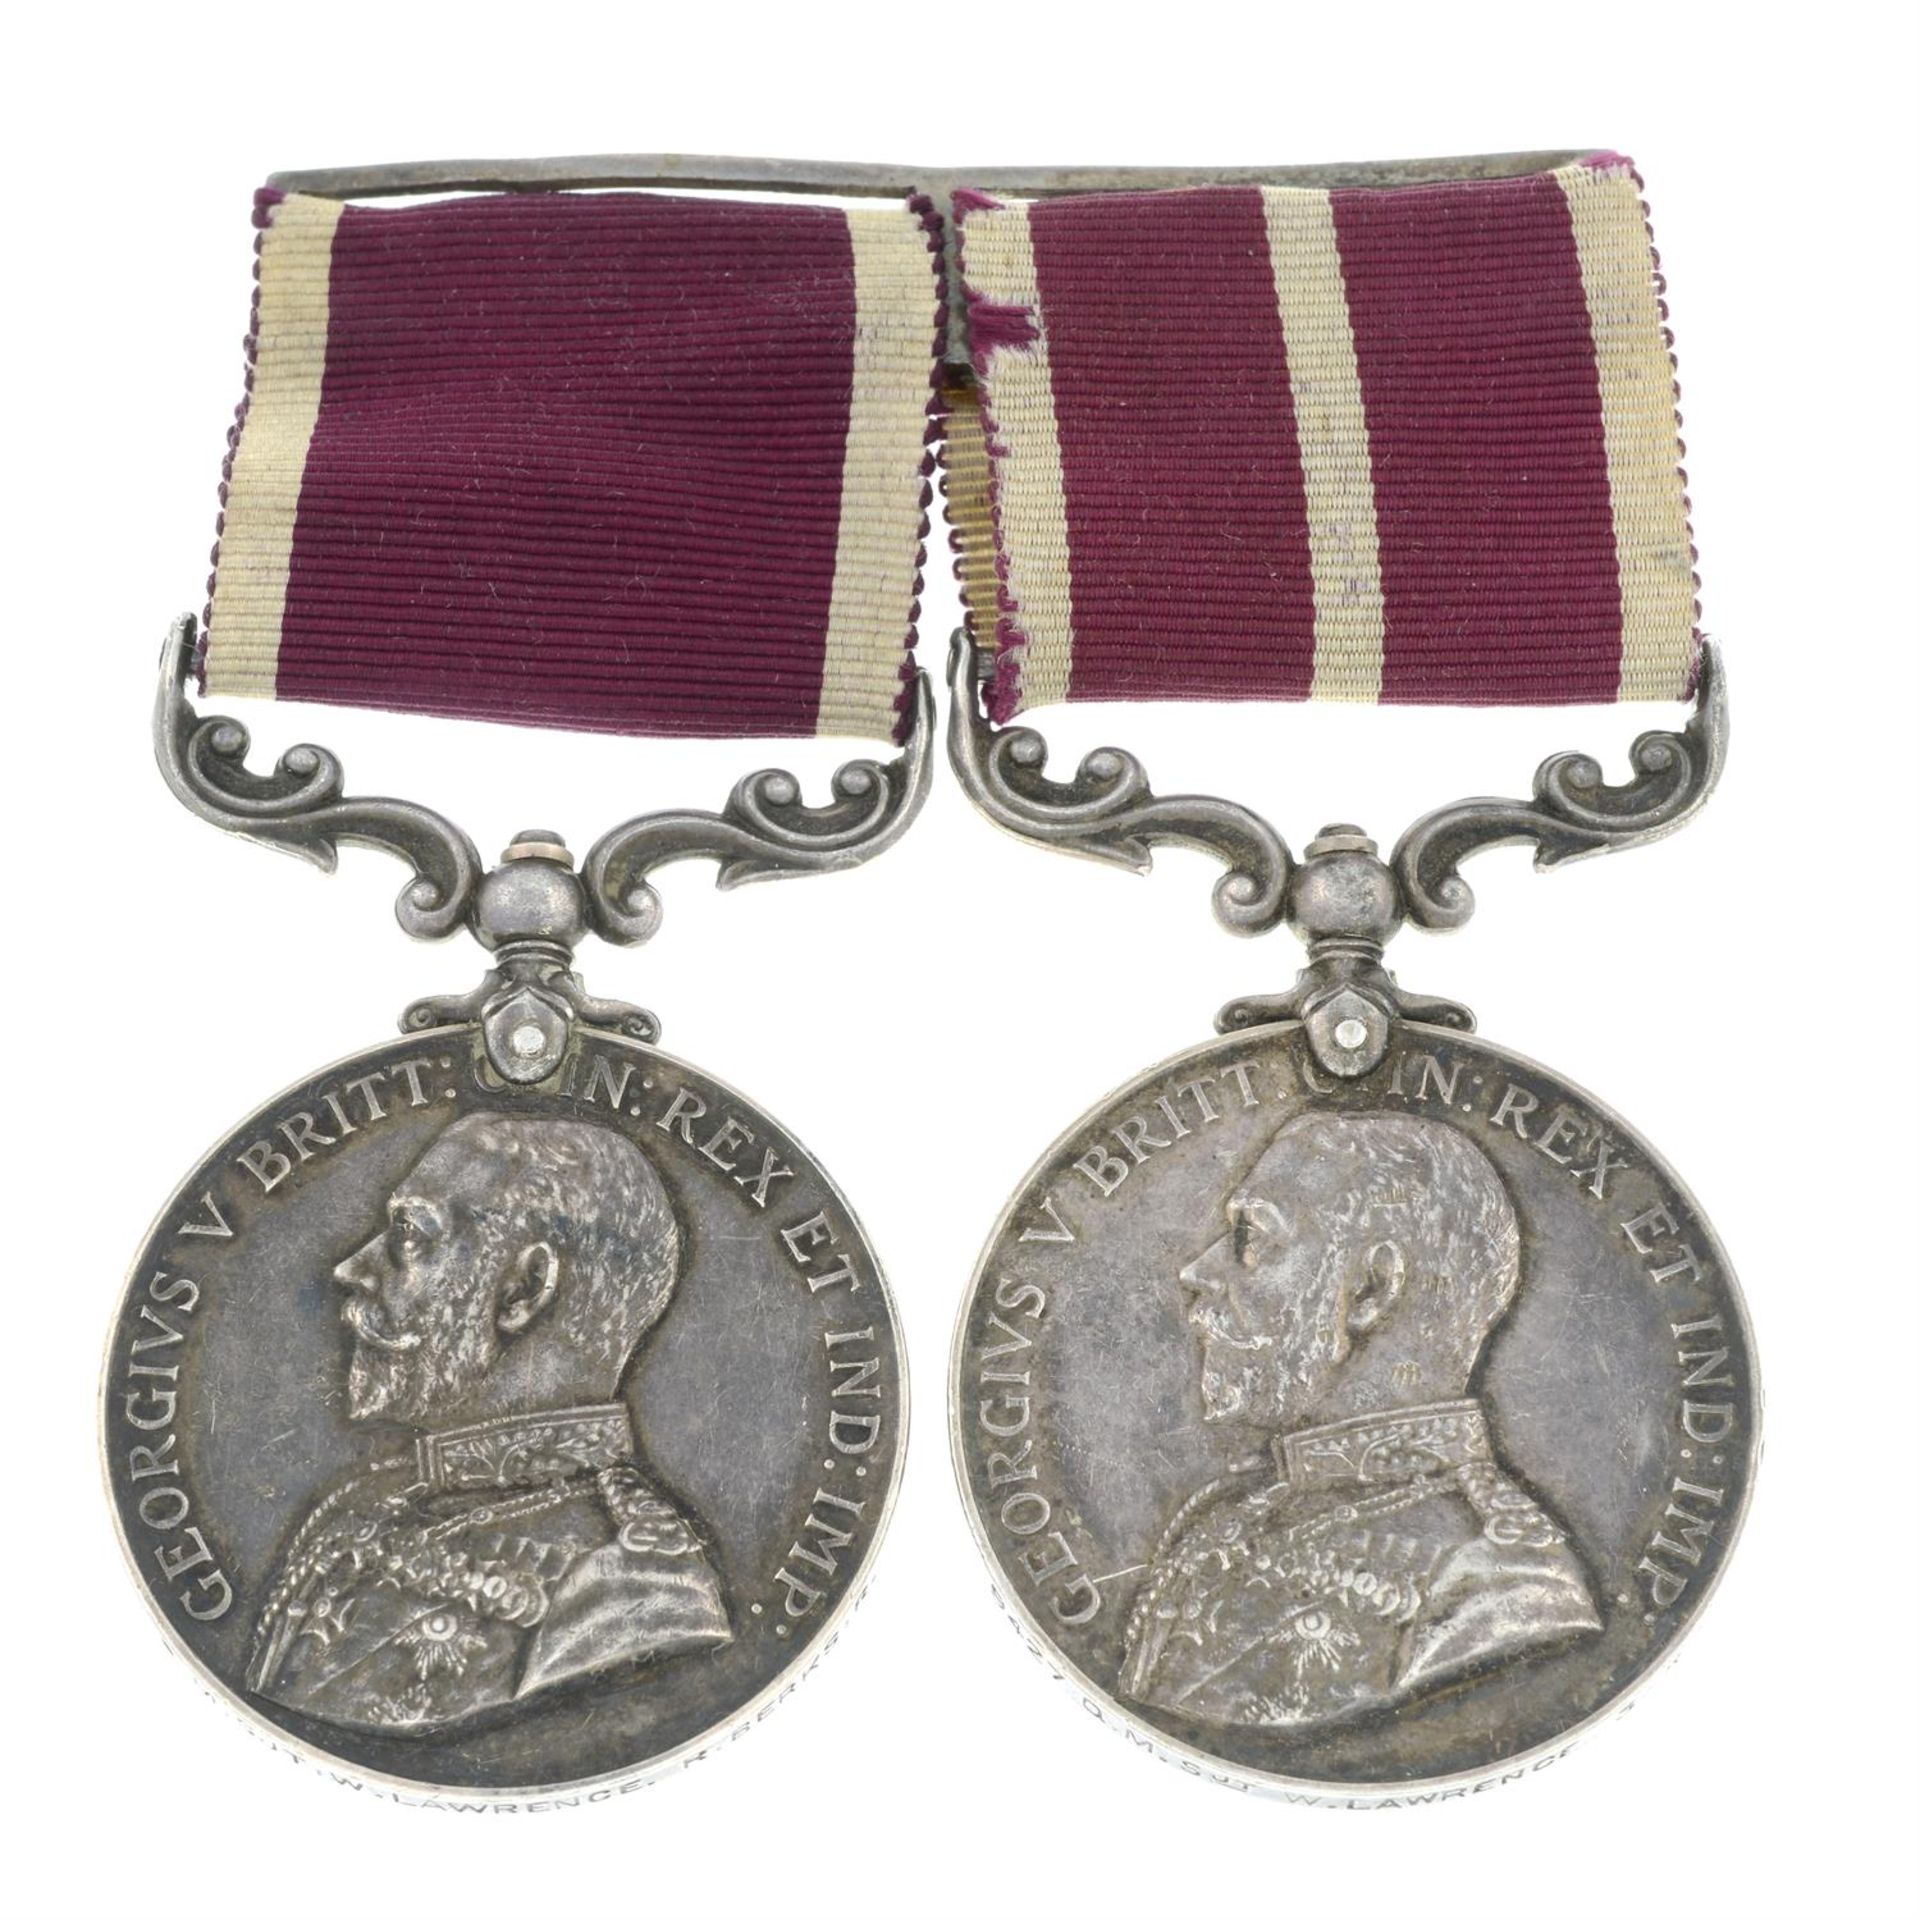 Army Meritorious Service Medal, and Army Long Service and Good Conduct Medal. (2).